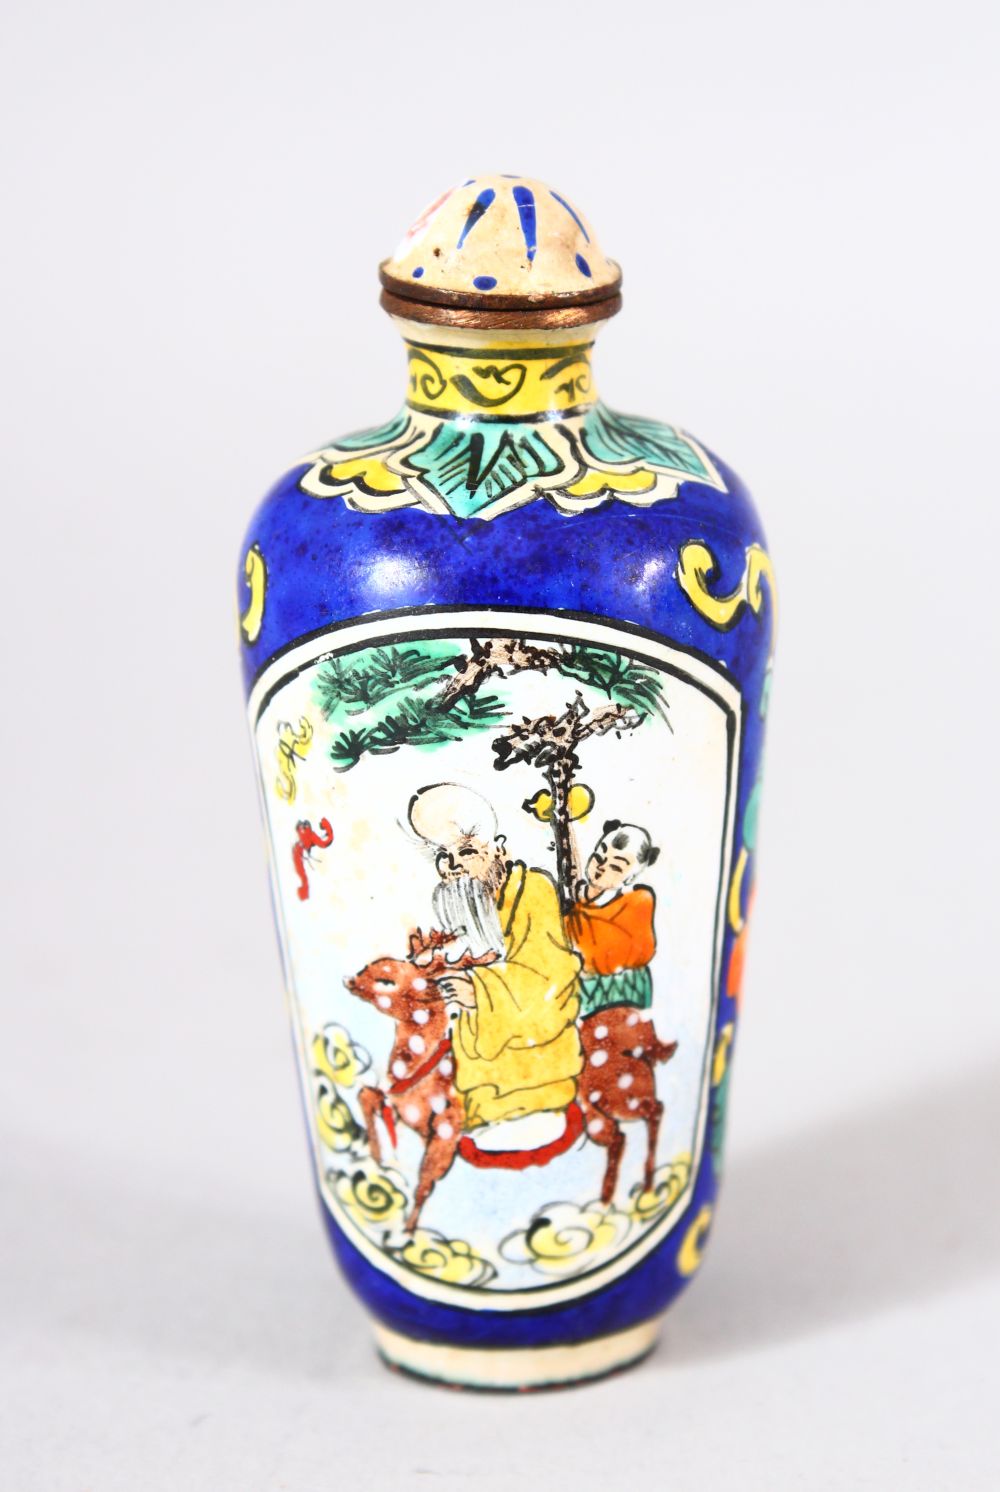 A CHINESE ENAMEL SNUFF BOTTLE - the bottle painted to depict shou lao and his deer holding a staff